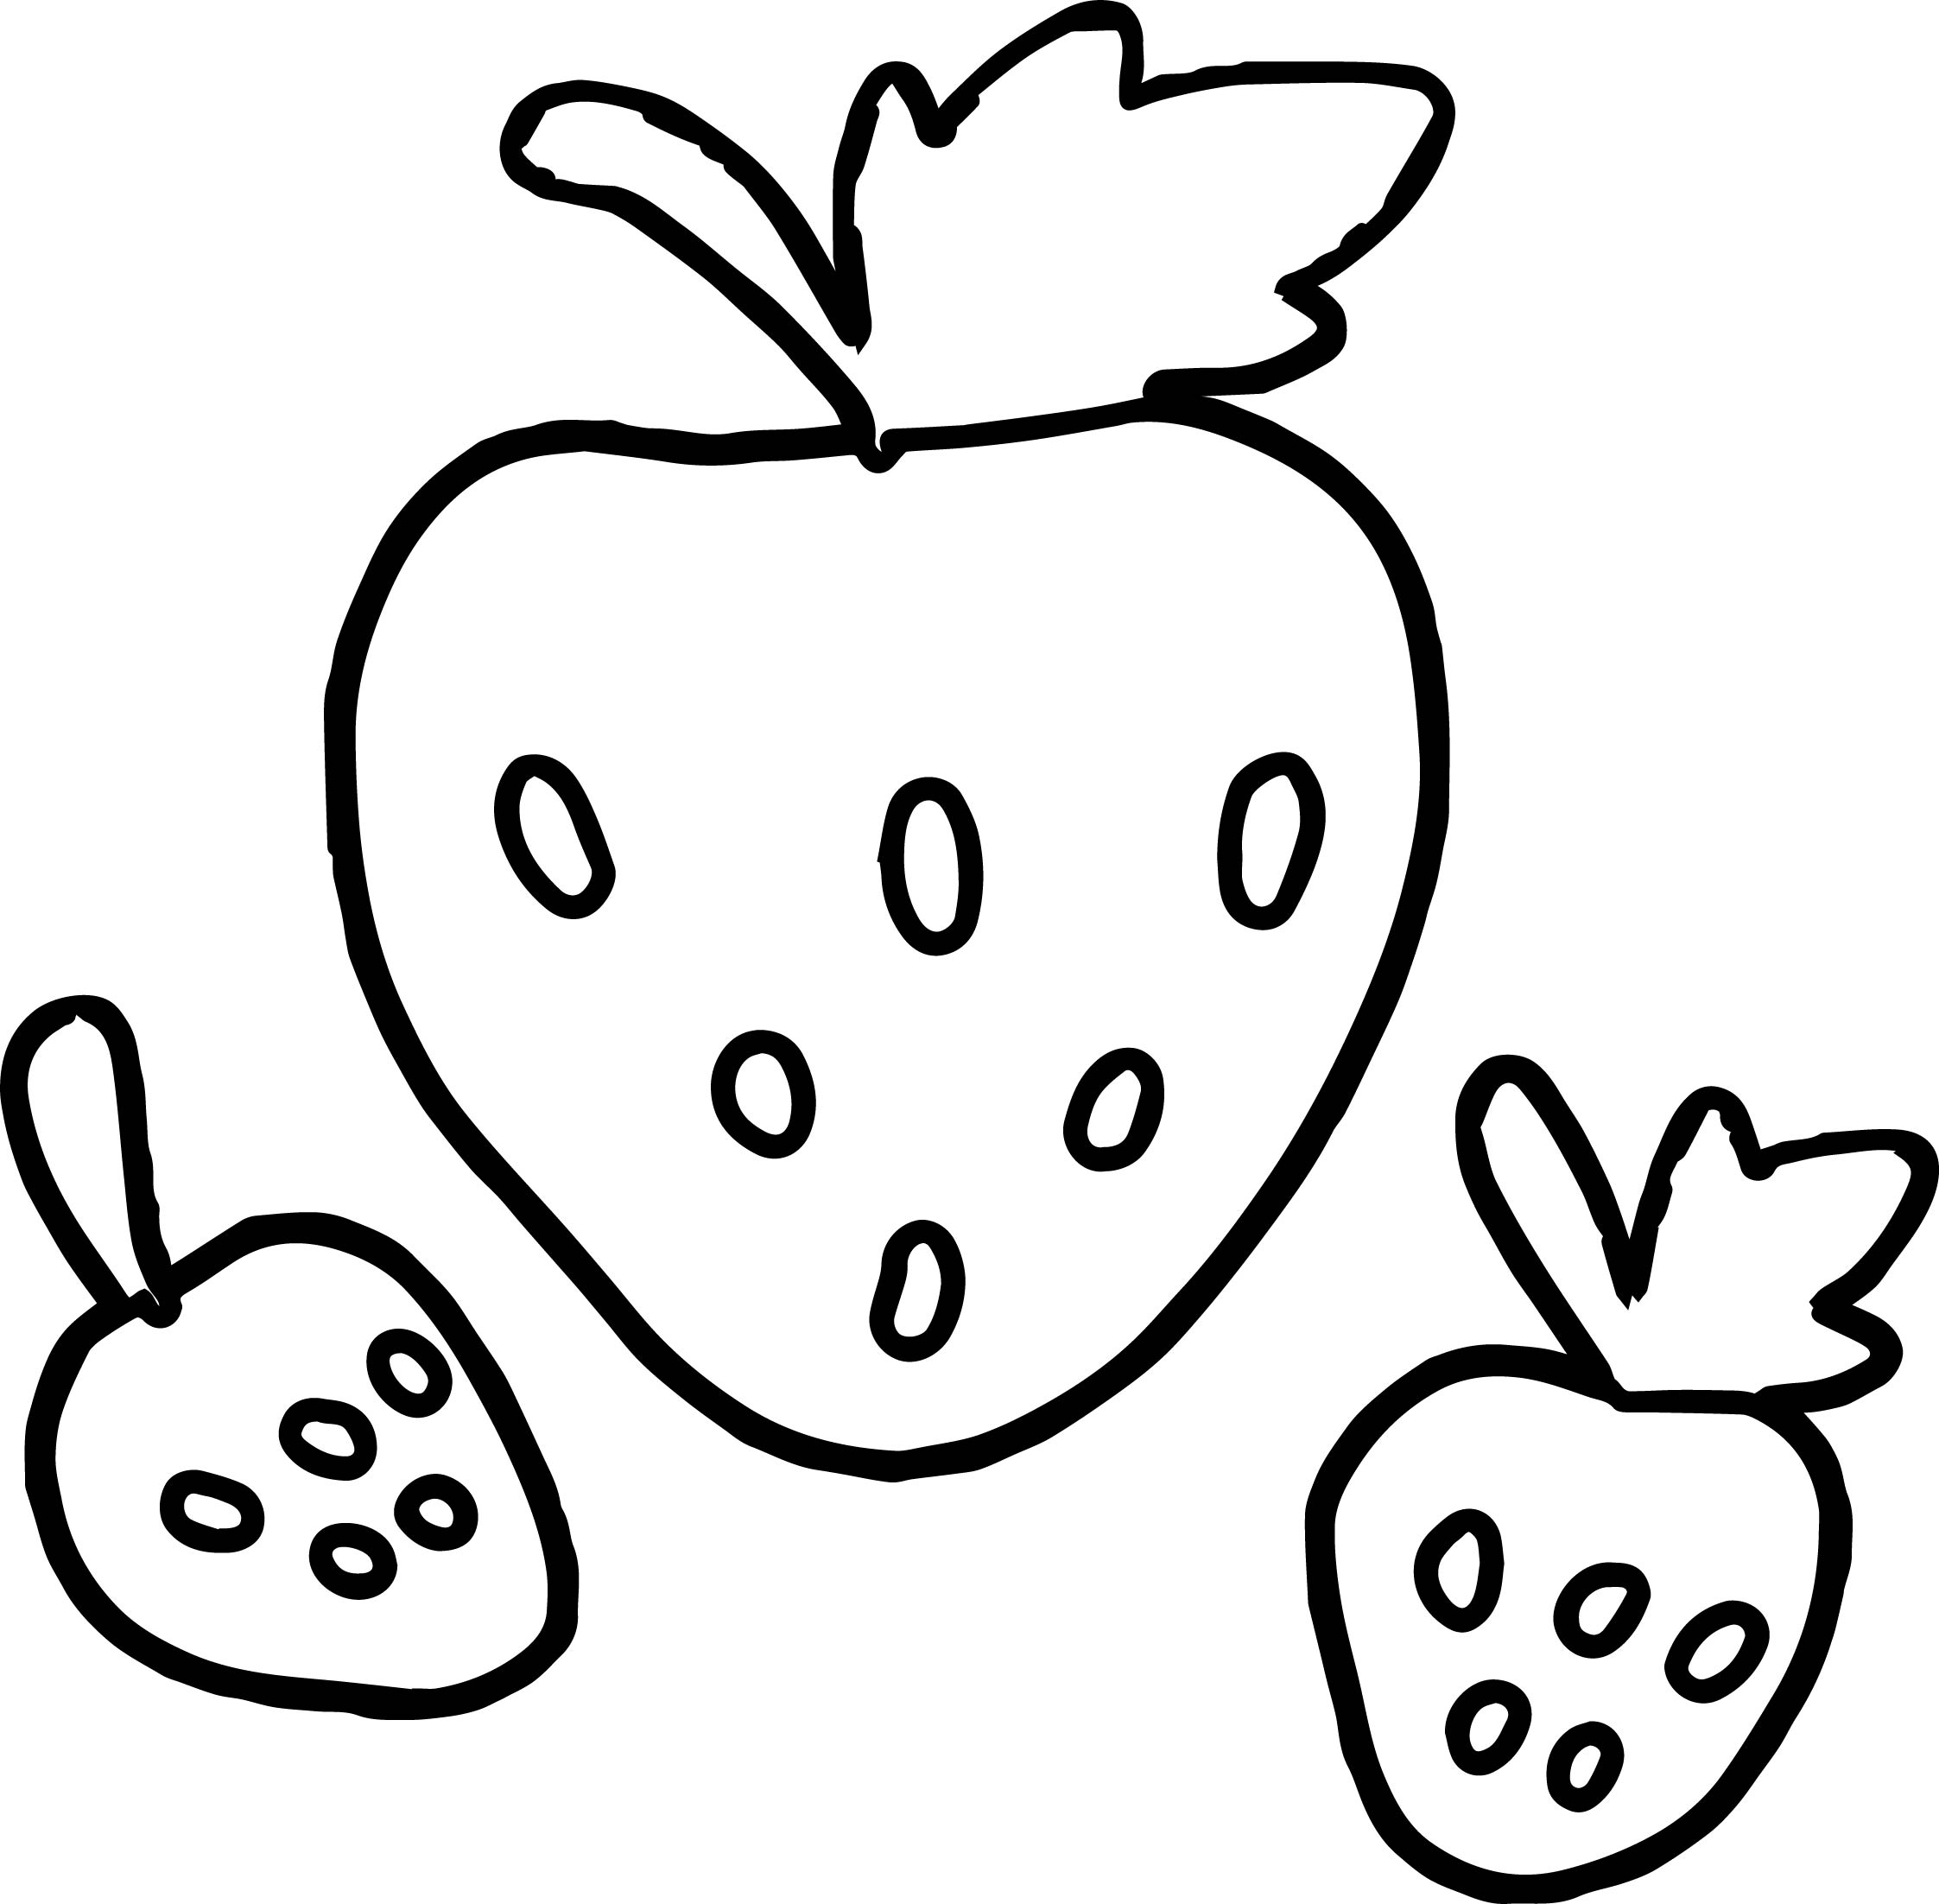 Strawberry Plant Coloring Page at GetColorings.com | Free printable ...